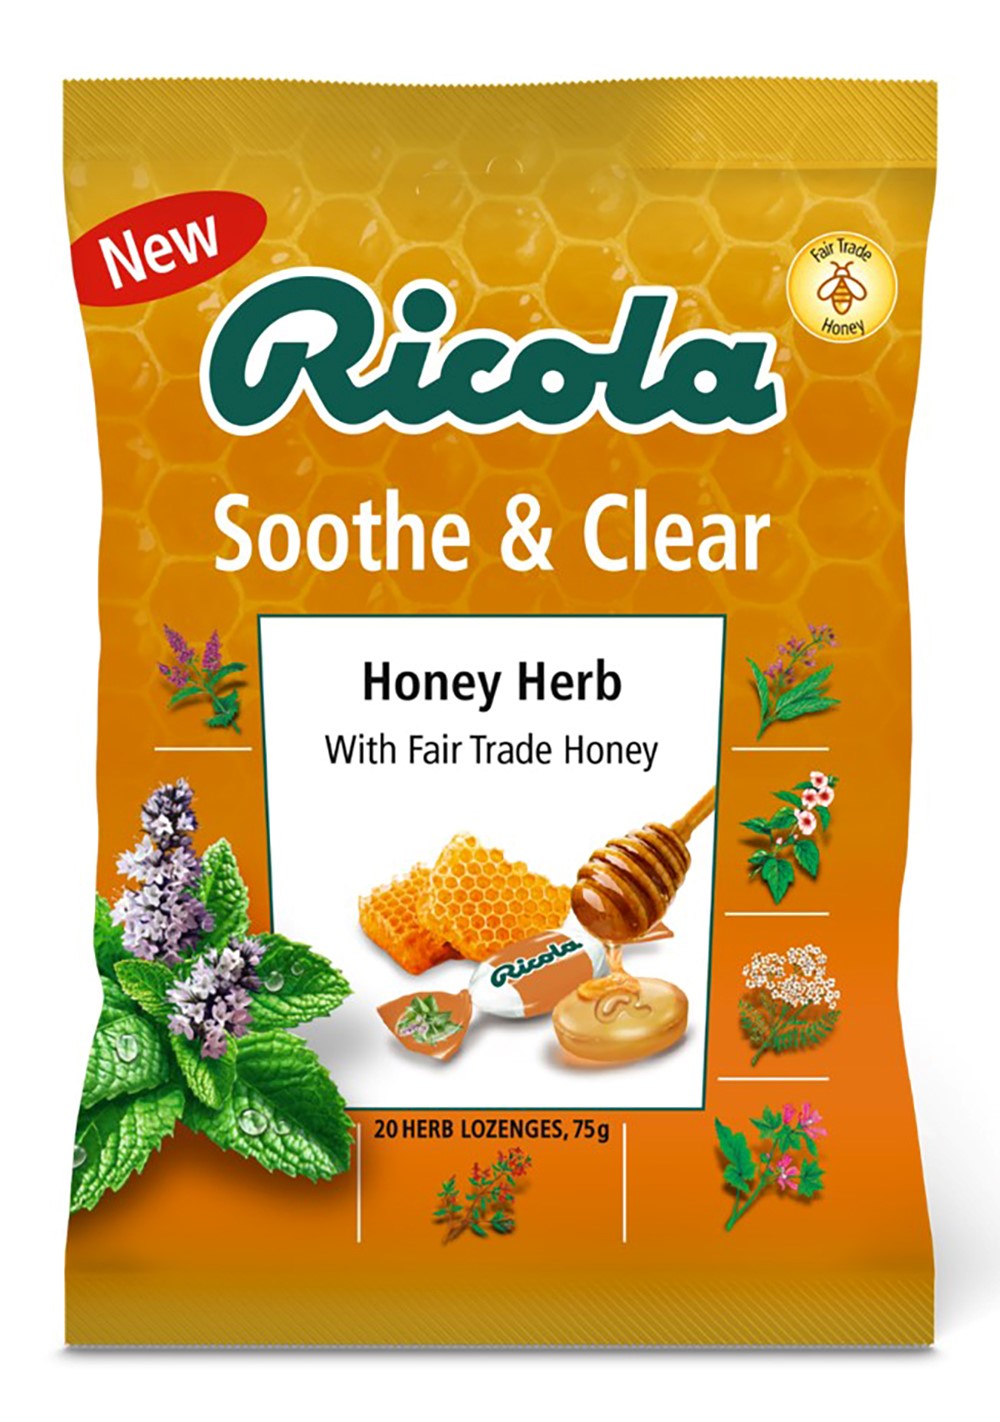 Soothe & Clear Honey Herb